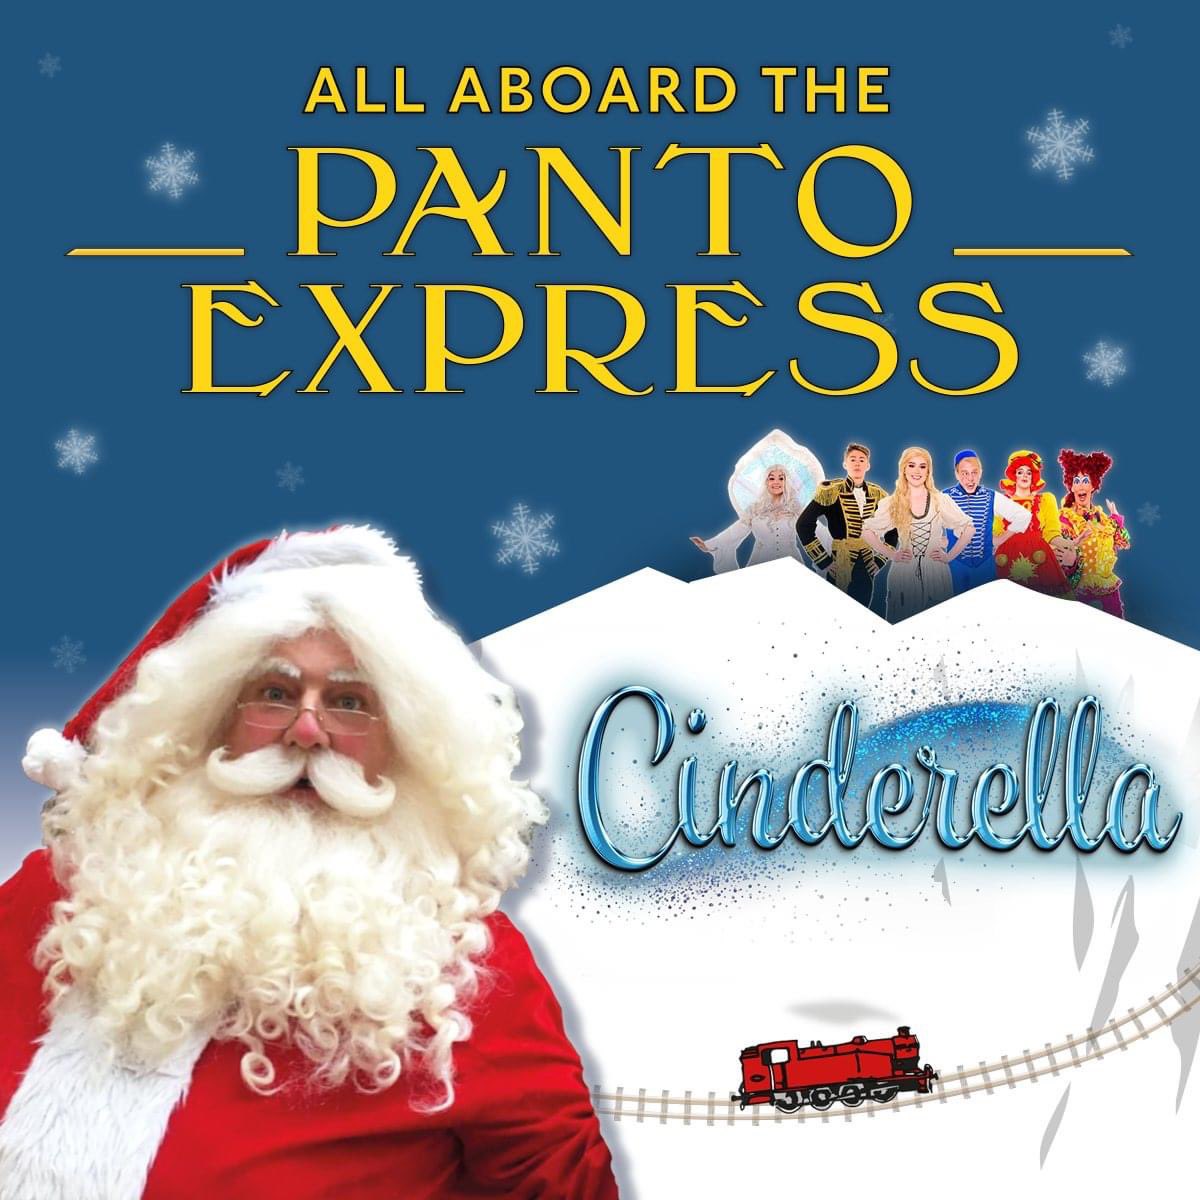 Tickets on sale on Monday! Take a vintage steam train ride on the Panto Express when Father Christmas visits you in your compartment, then come inside our visitor centre and watch our mini pantomime, Cinderella. bucksrailcentre.org #pantoexpress #fatherchristmas #santa